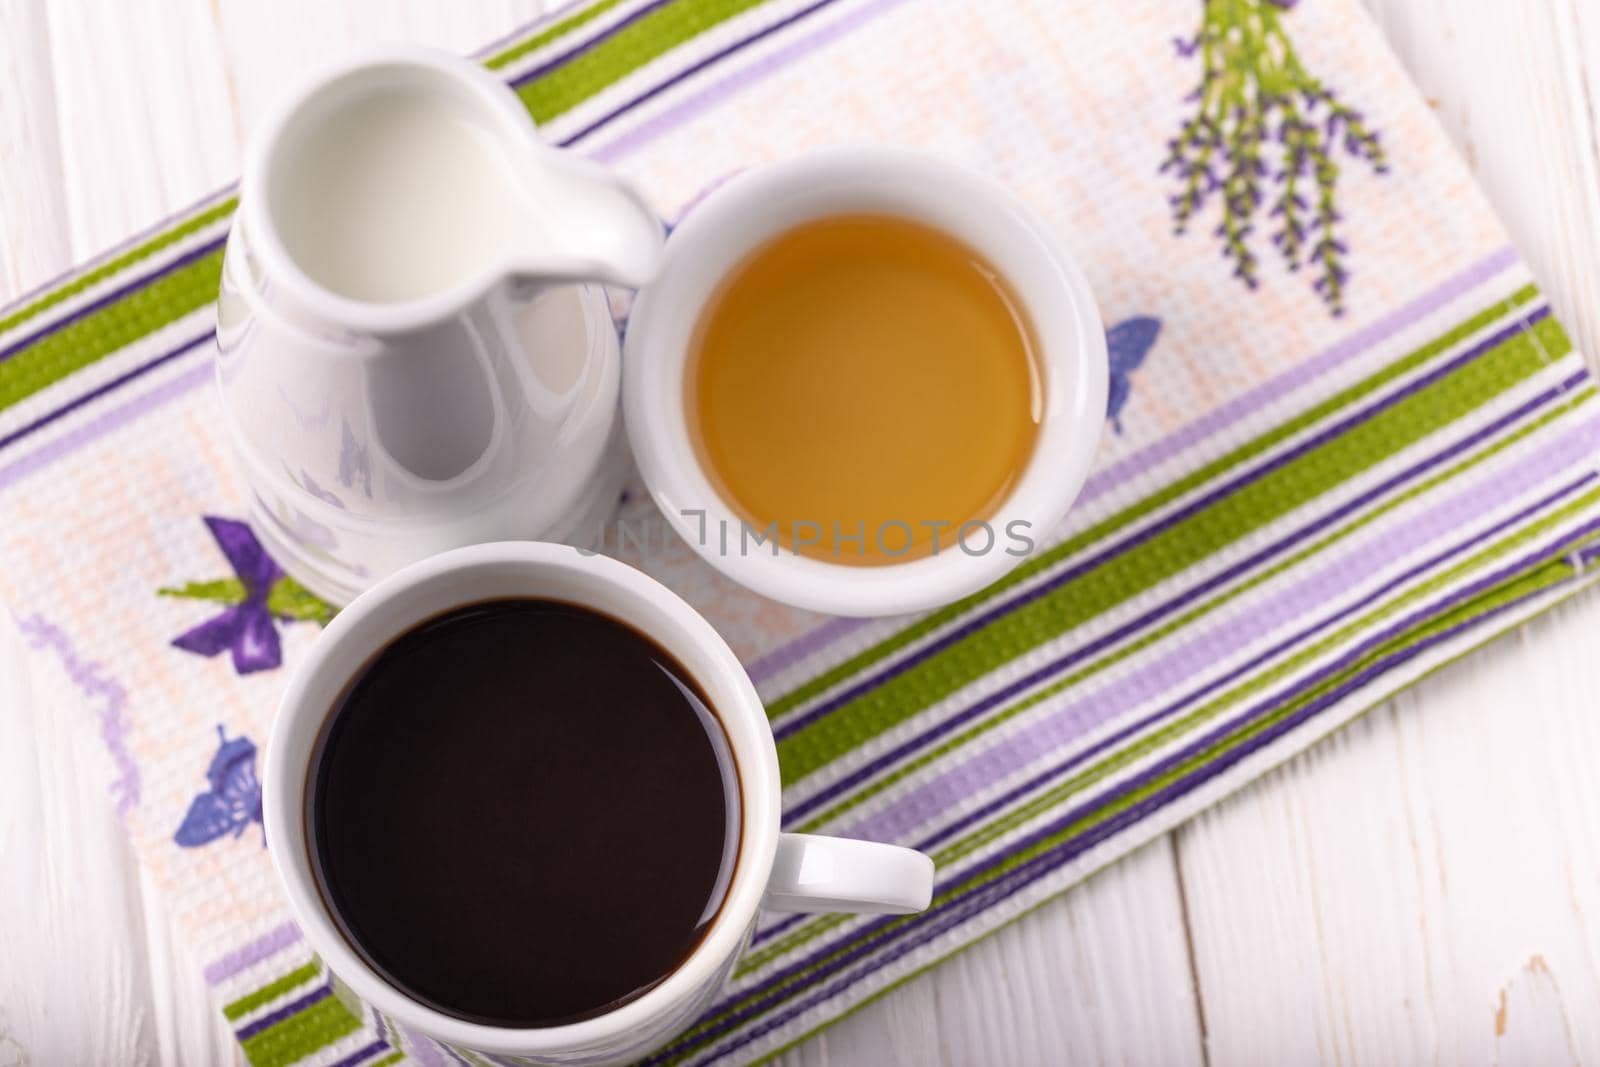 A cup of coffee, milk in a jar and honey in a bowl on a colorful napkin. White wooden background, rustic style, top view